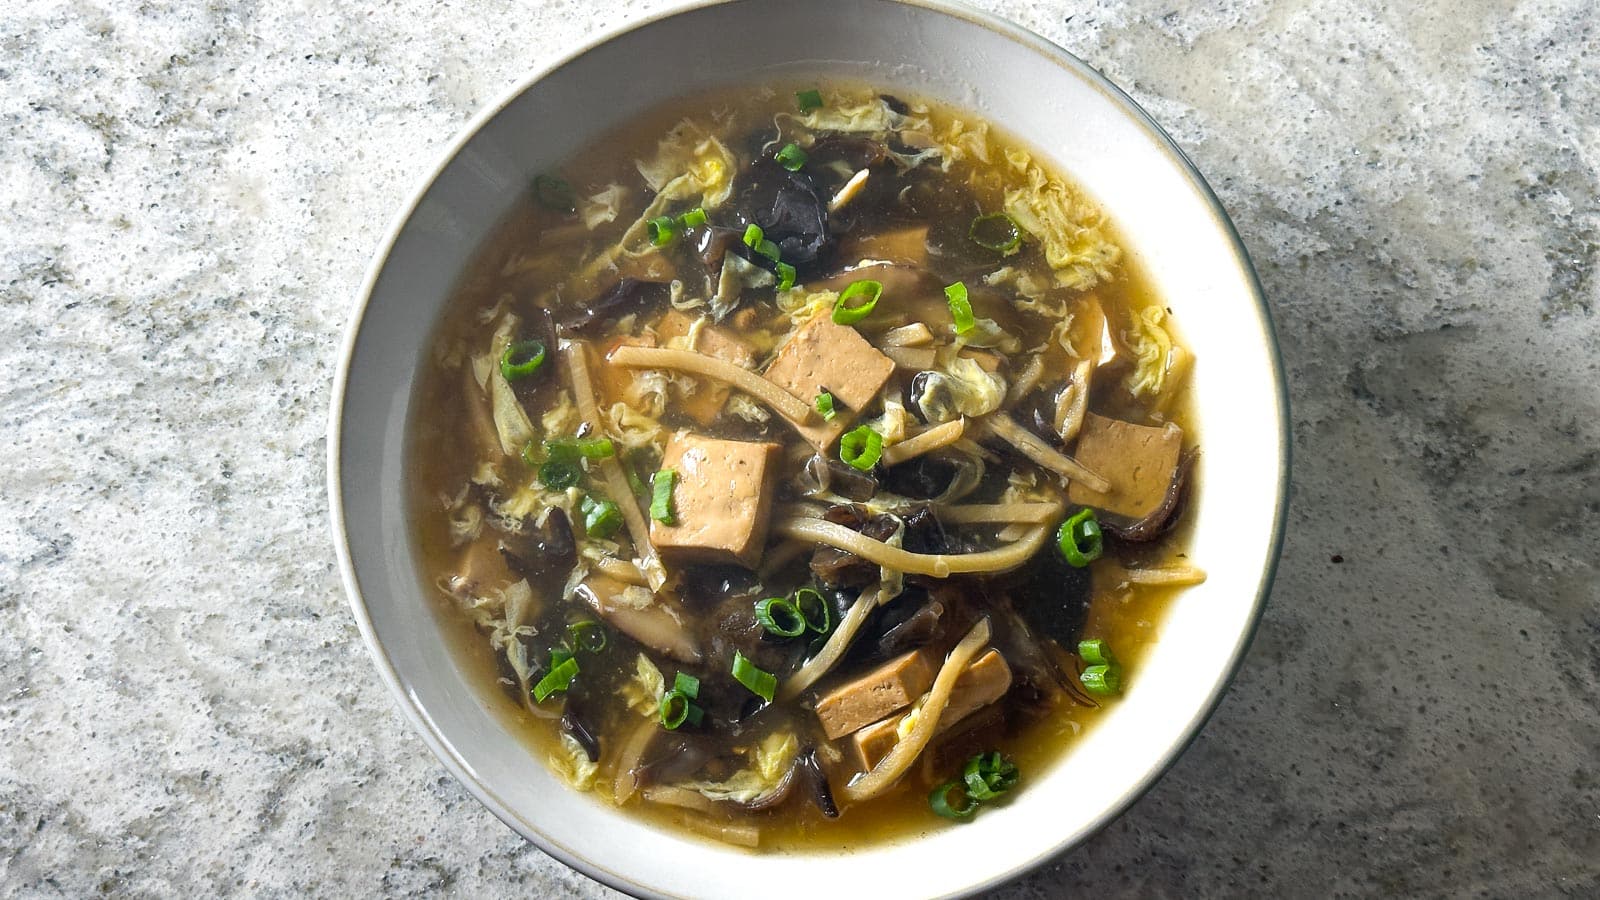 Overhead image of Low FODMAP Vegetarian Hot and Sour Soup in white bowl with scallions